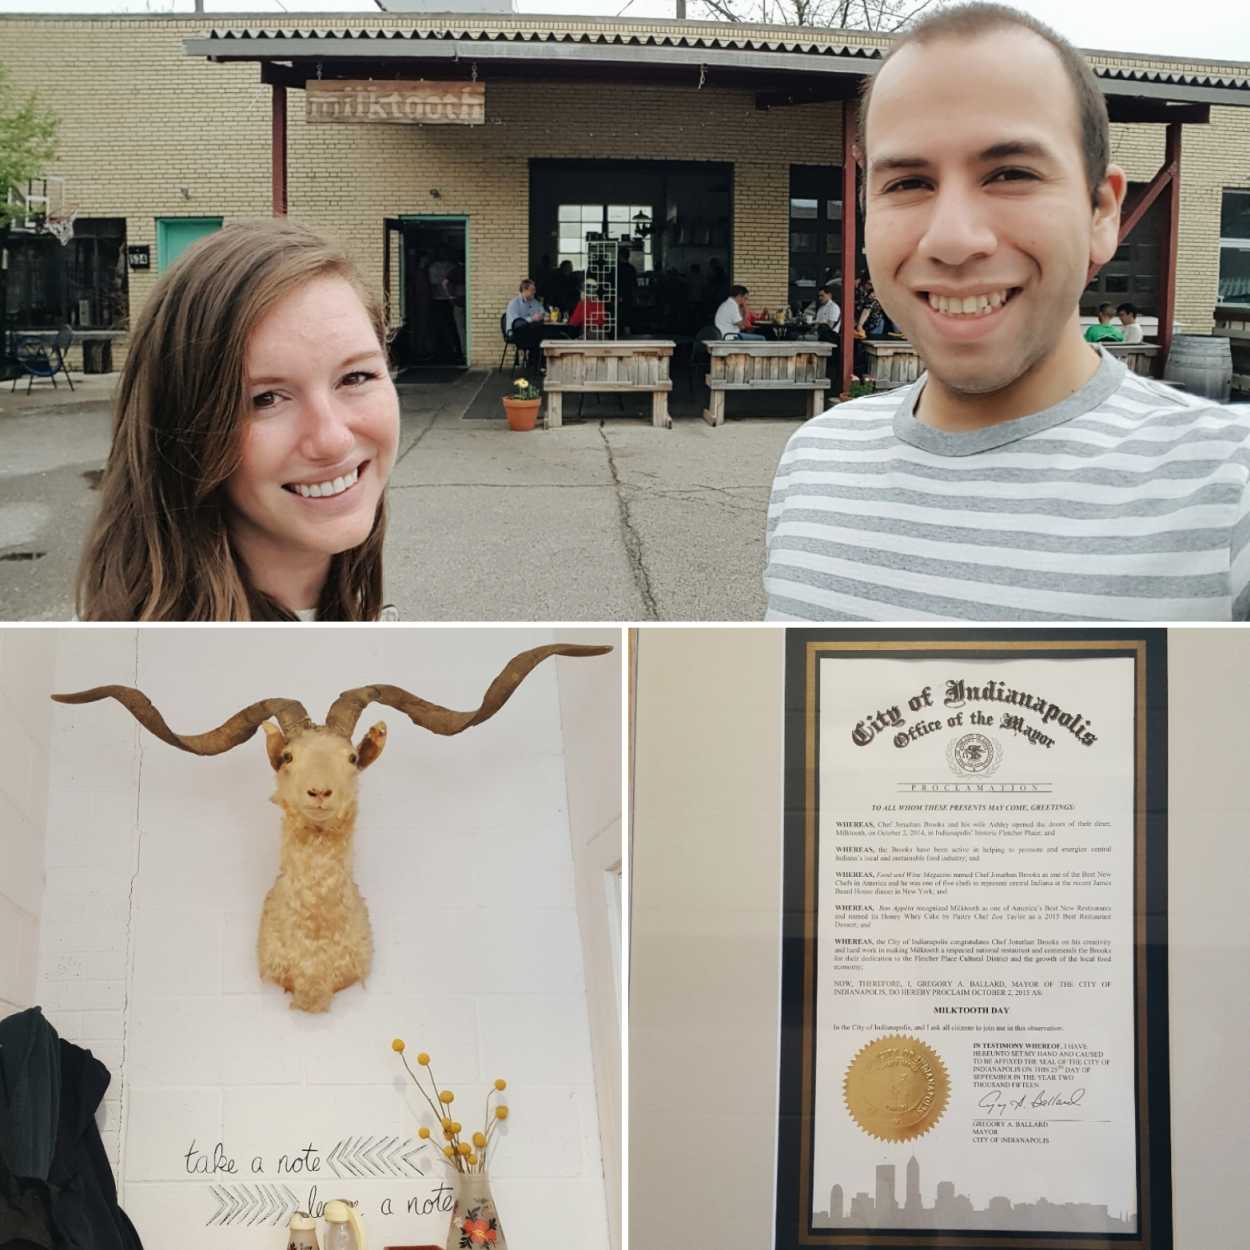 A collage of photos taken at Milktooth: Alyssa and Michael in front, a longhorn sheep head mounted on the wall, and a certificate from the mayor of Indianapolis